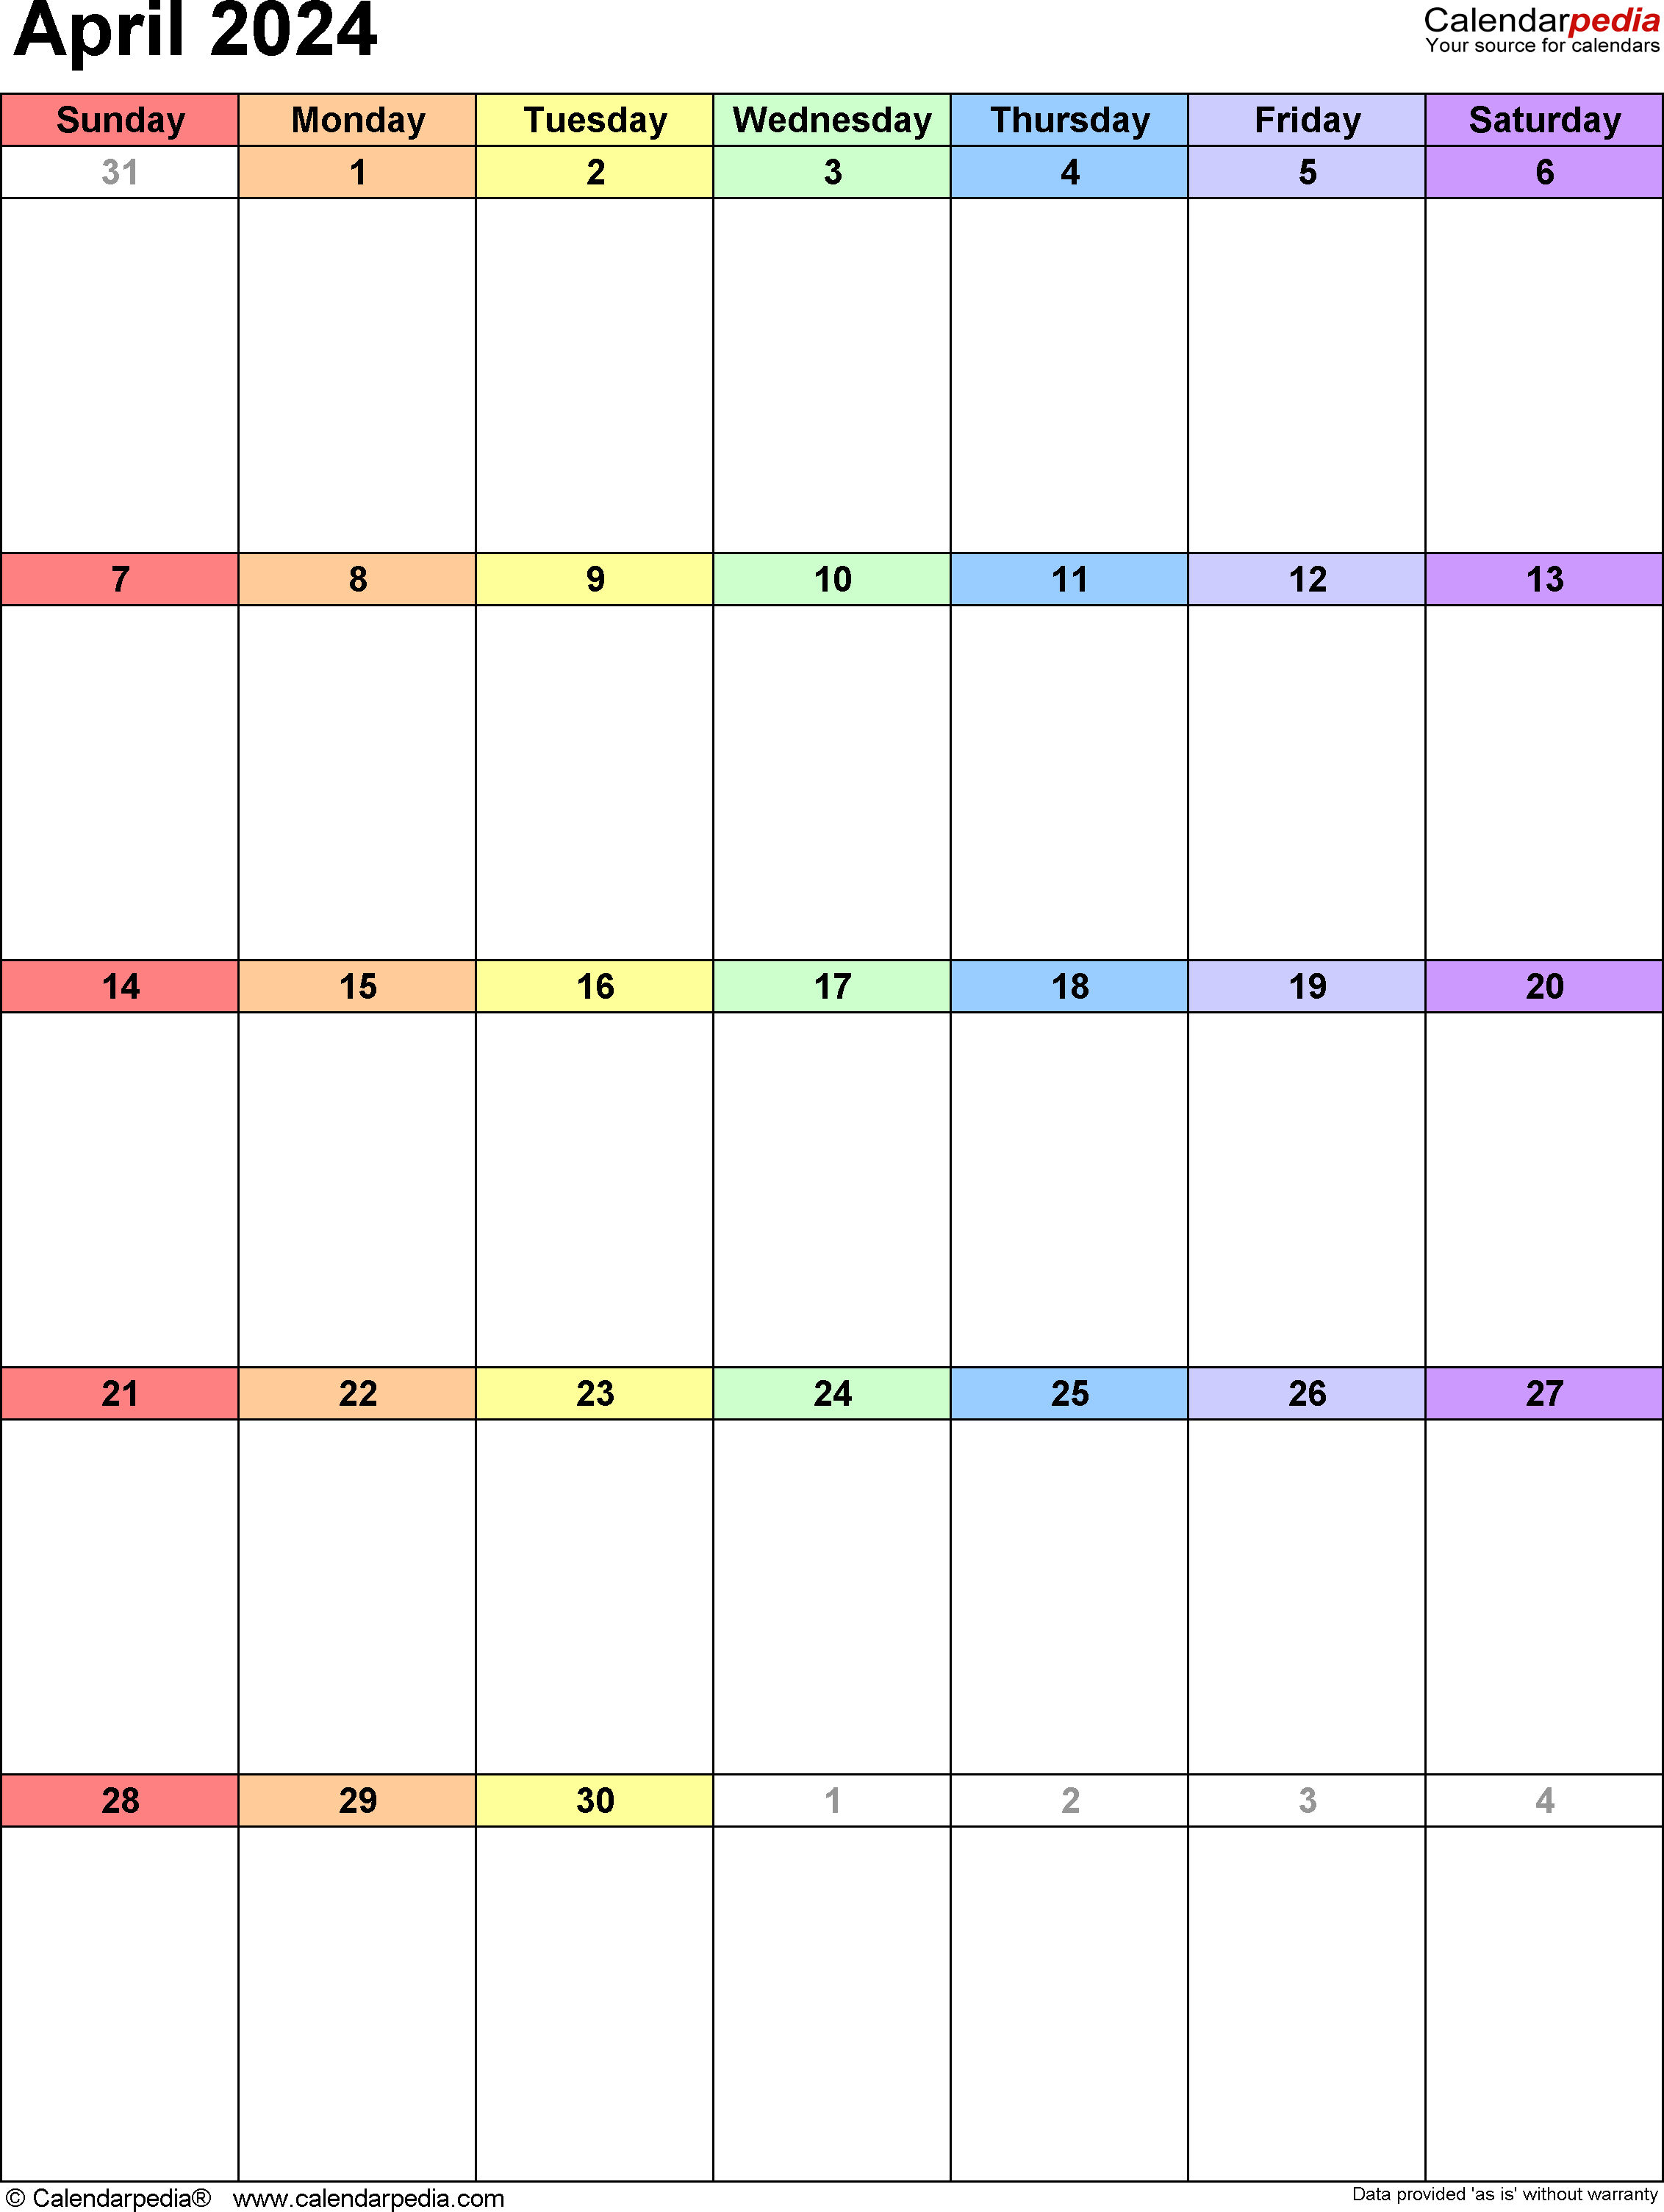 April 2024 Calendar | Templates For Word, Excel And Pdf with April 2024 Fillable Calendar